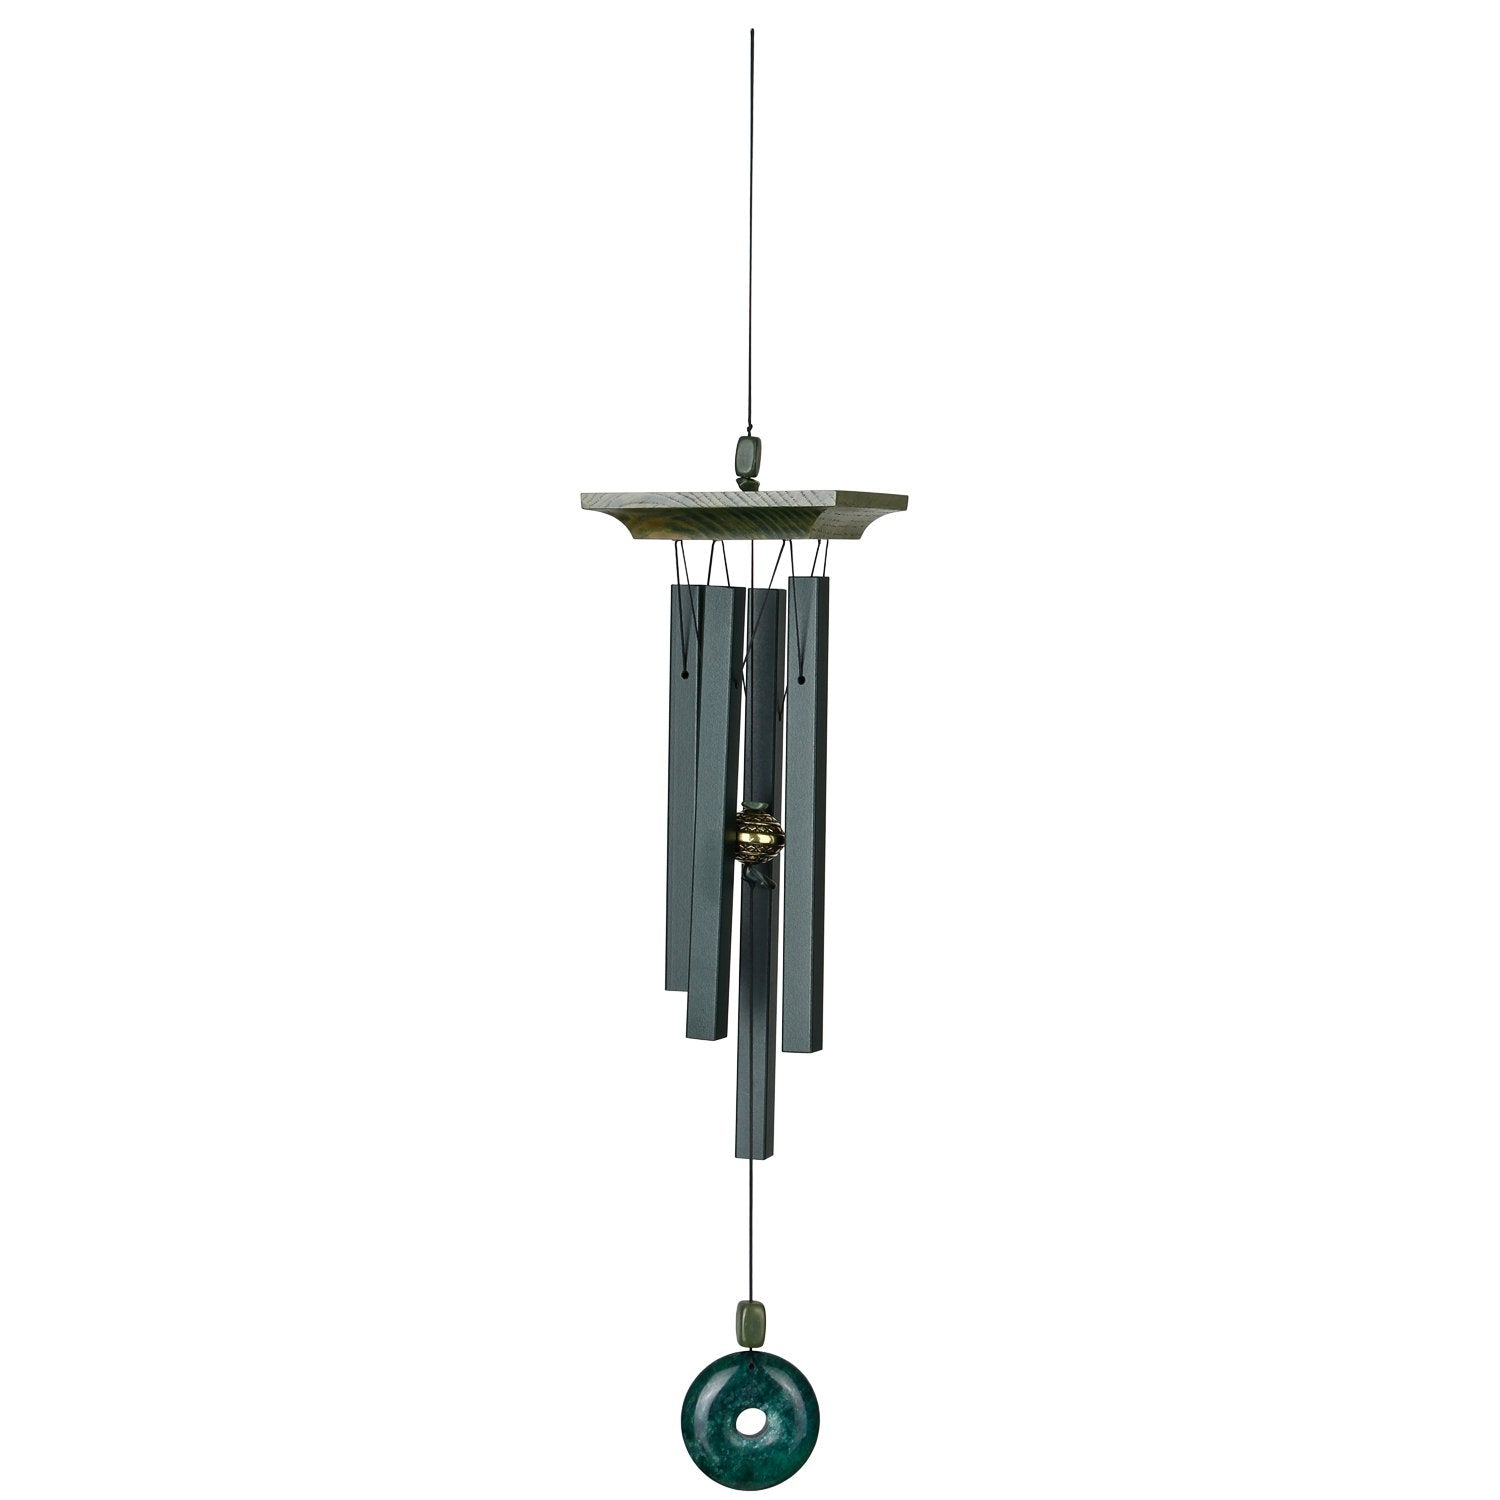 Jade Chime full product image